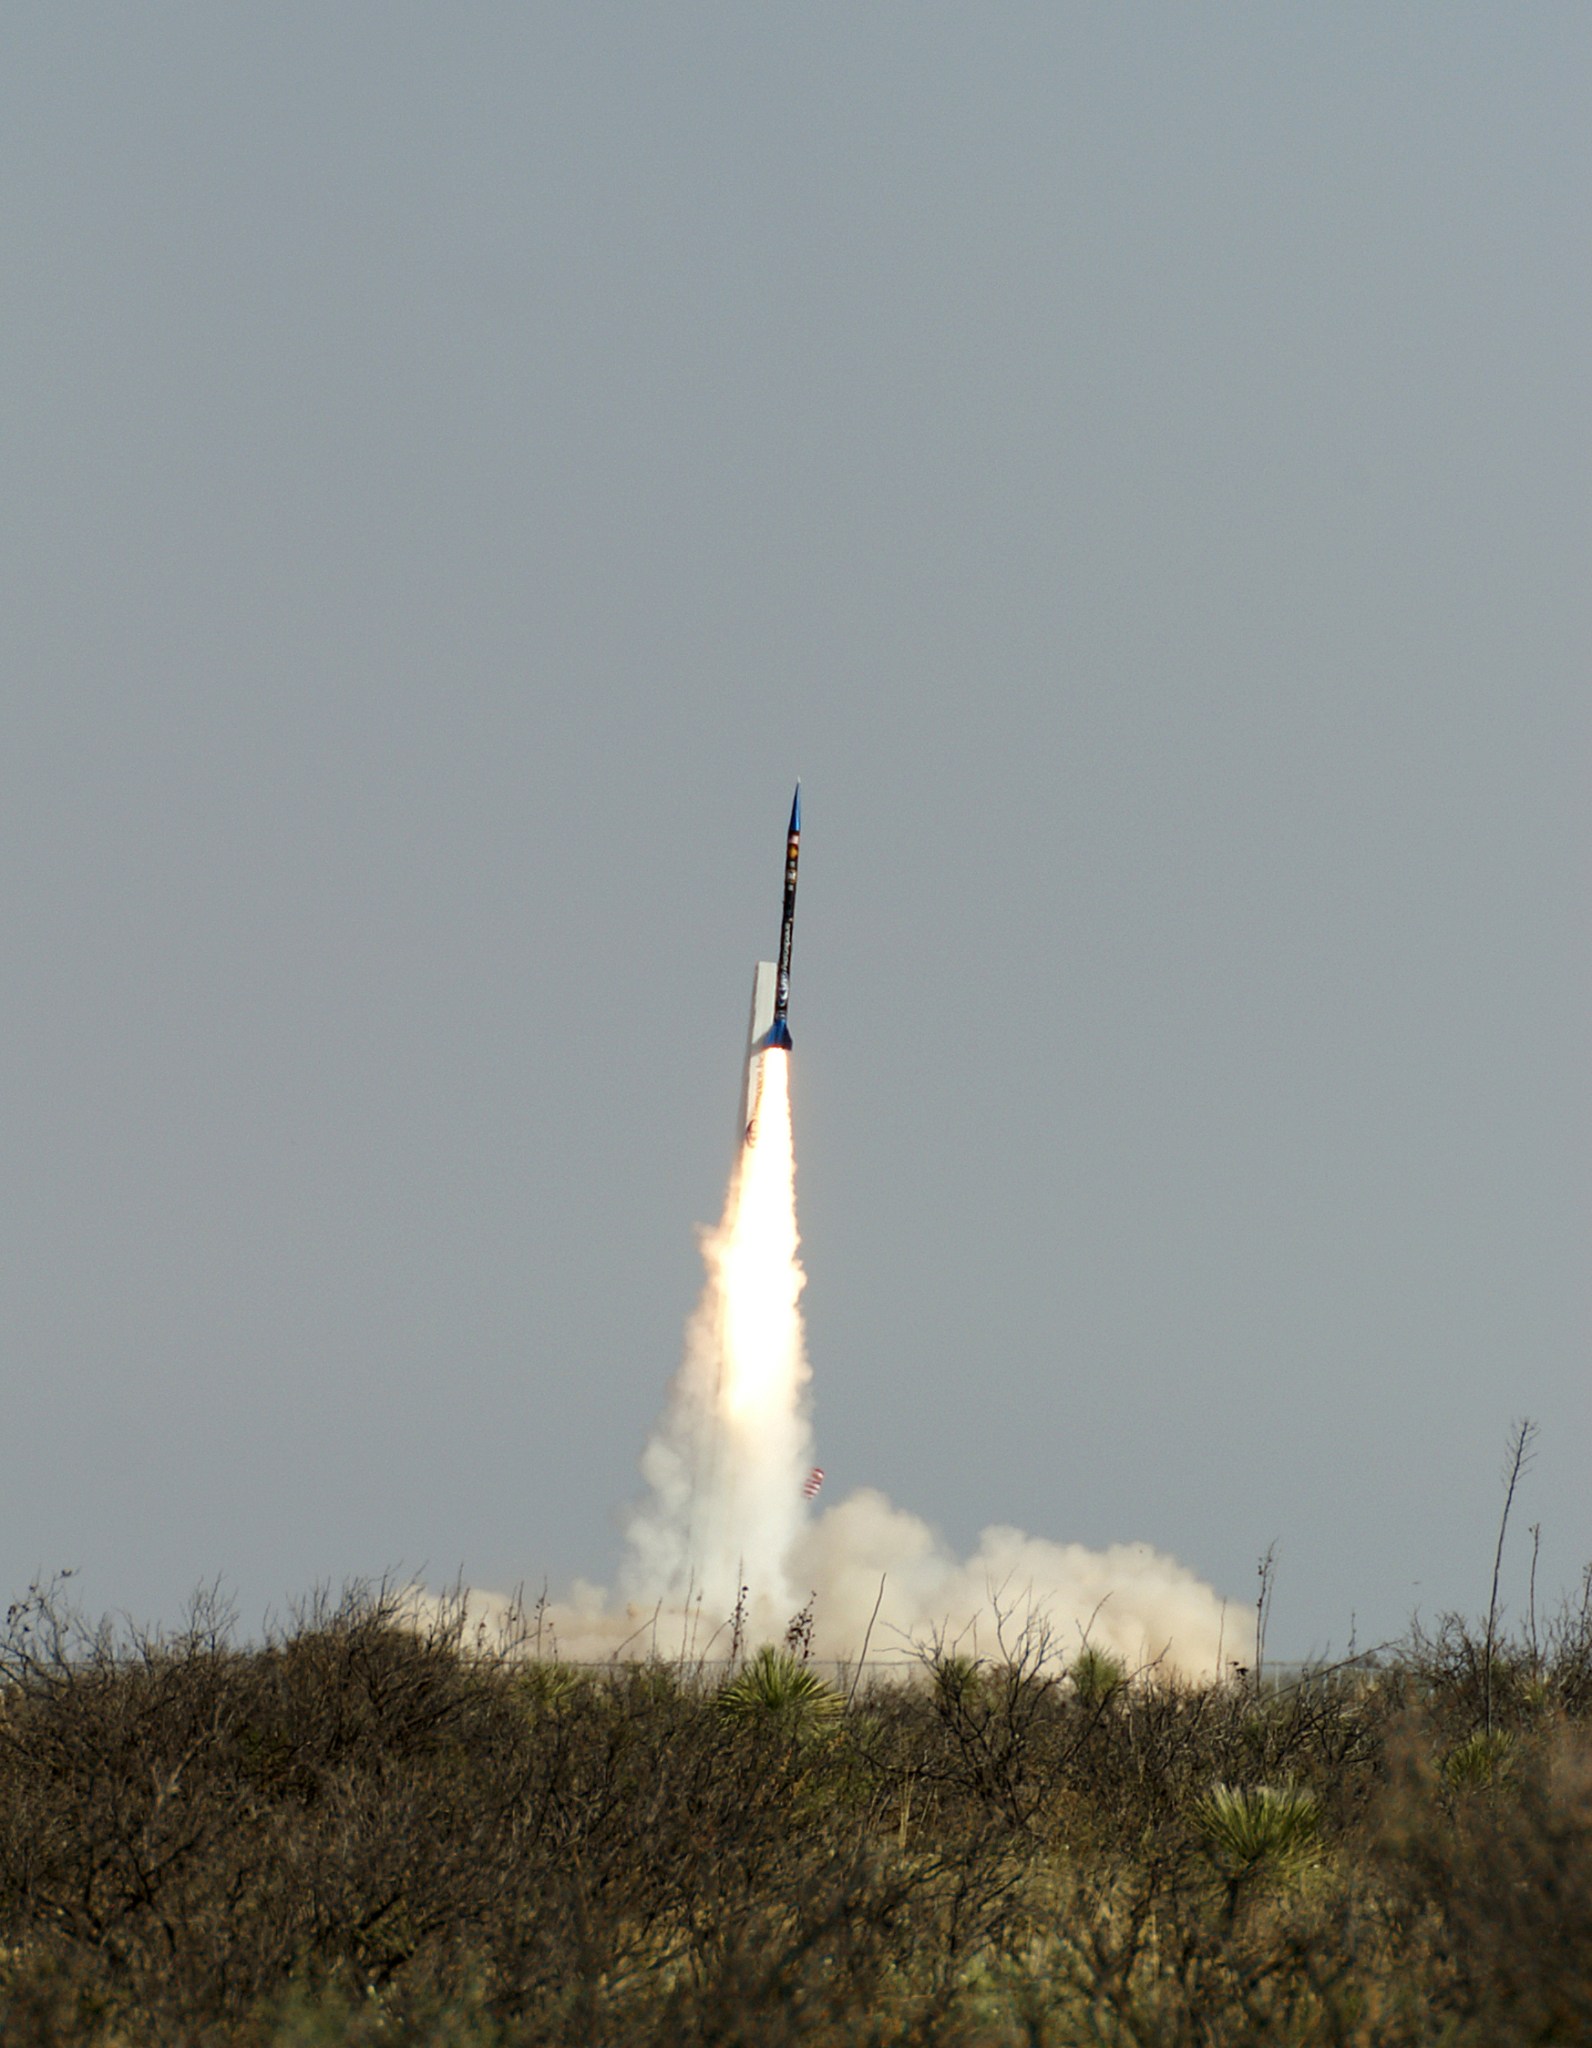 Previous launch of UP Aerospace’s SpaceLoft rocket from Spaceport America in New Mexico in 2013.